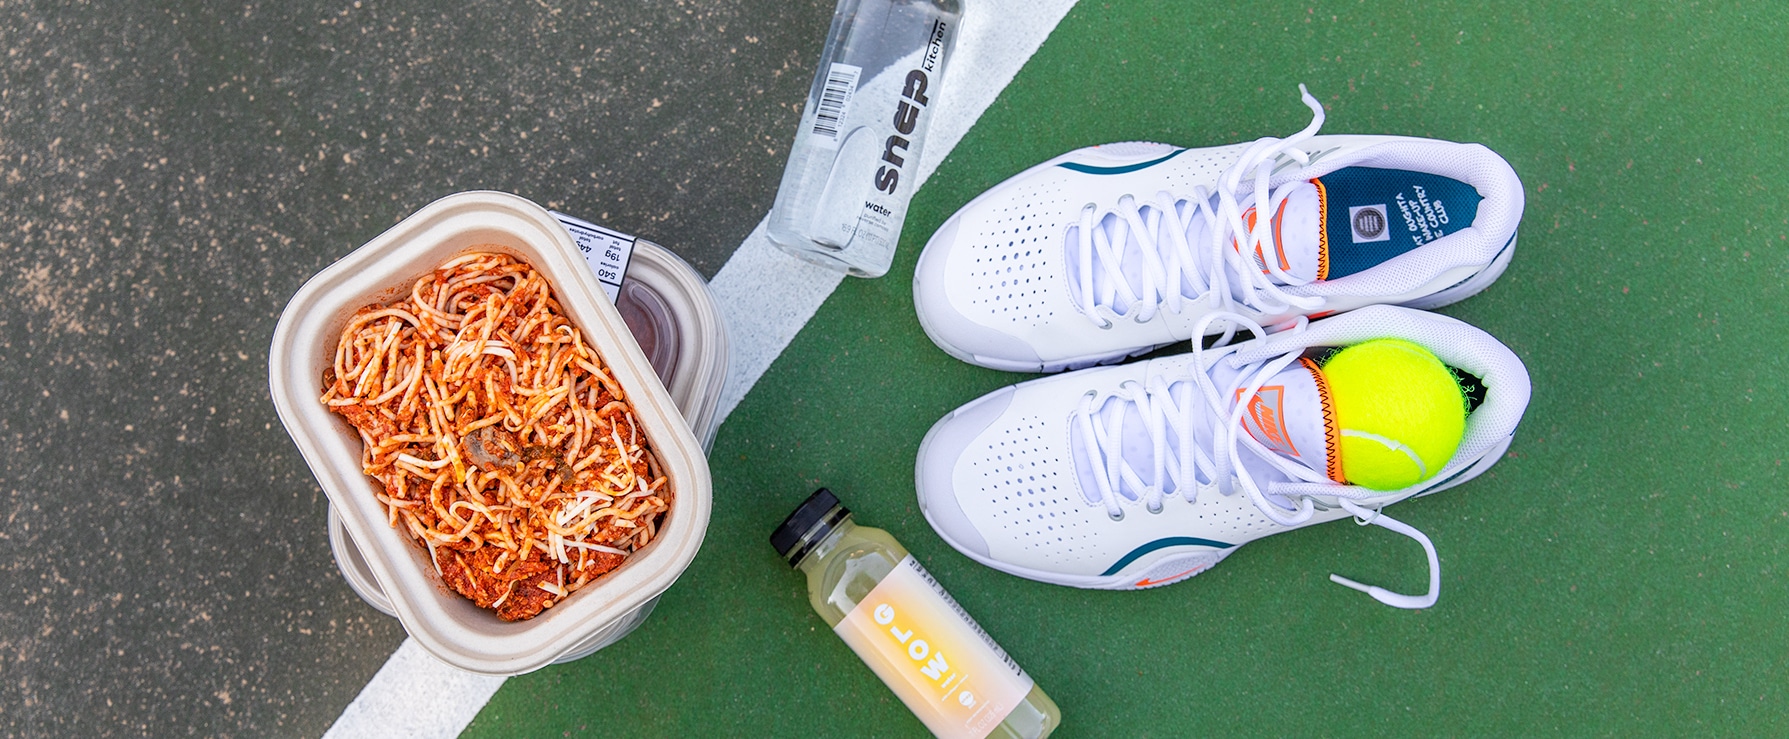 A pair of white sneakers with a tennis ball sitting inside of them, with bottles of water and juice, and a to-go container of spaghetti sitting on pavement